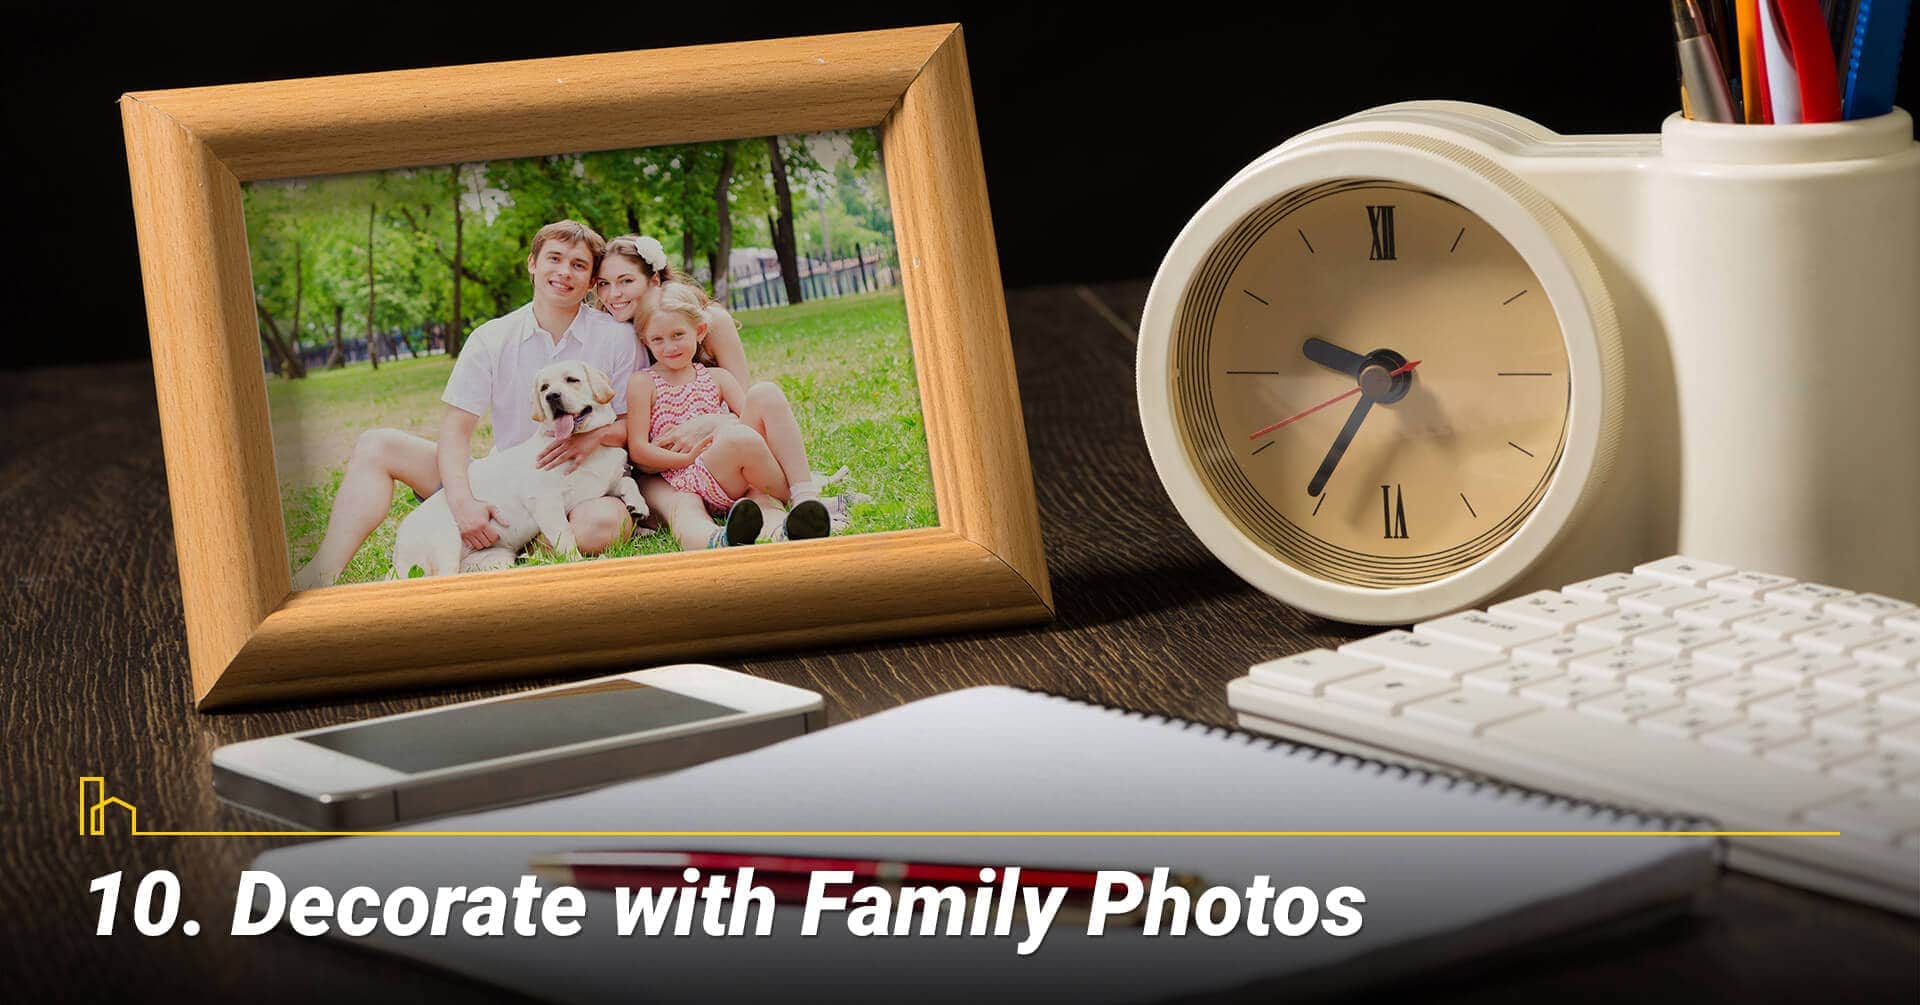 Decorate with Family Photos, display family photos around the house